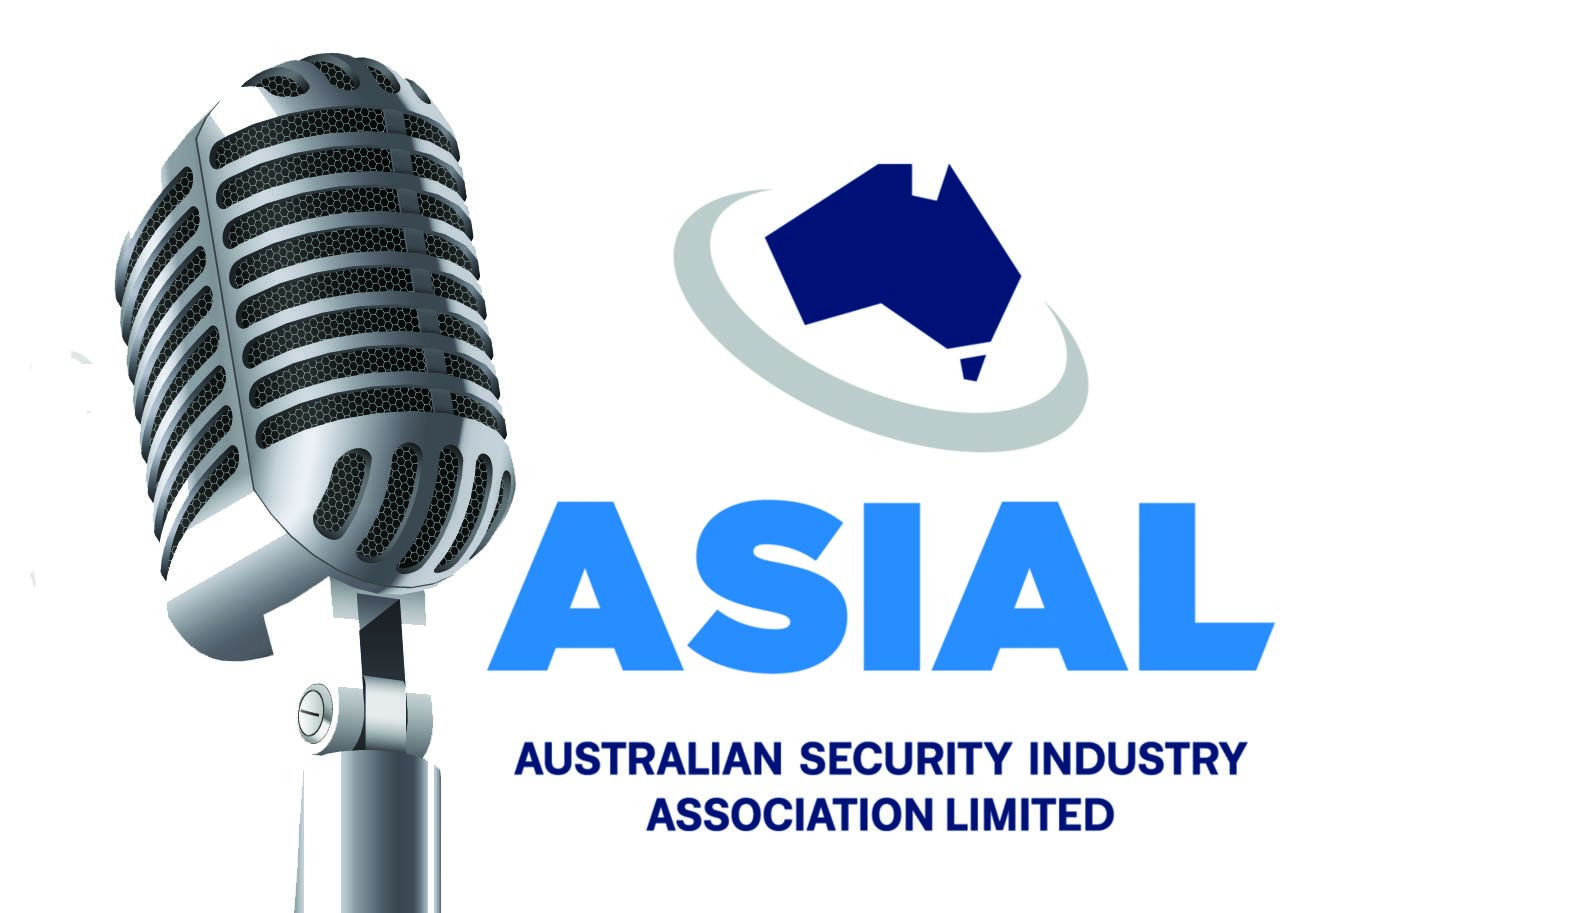 Security Solutions - 1 ASIAL